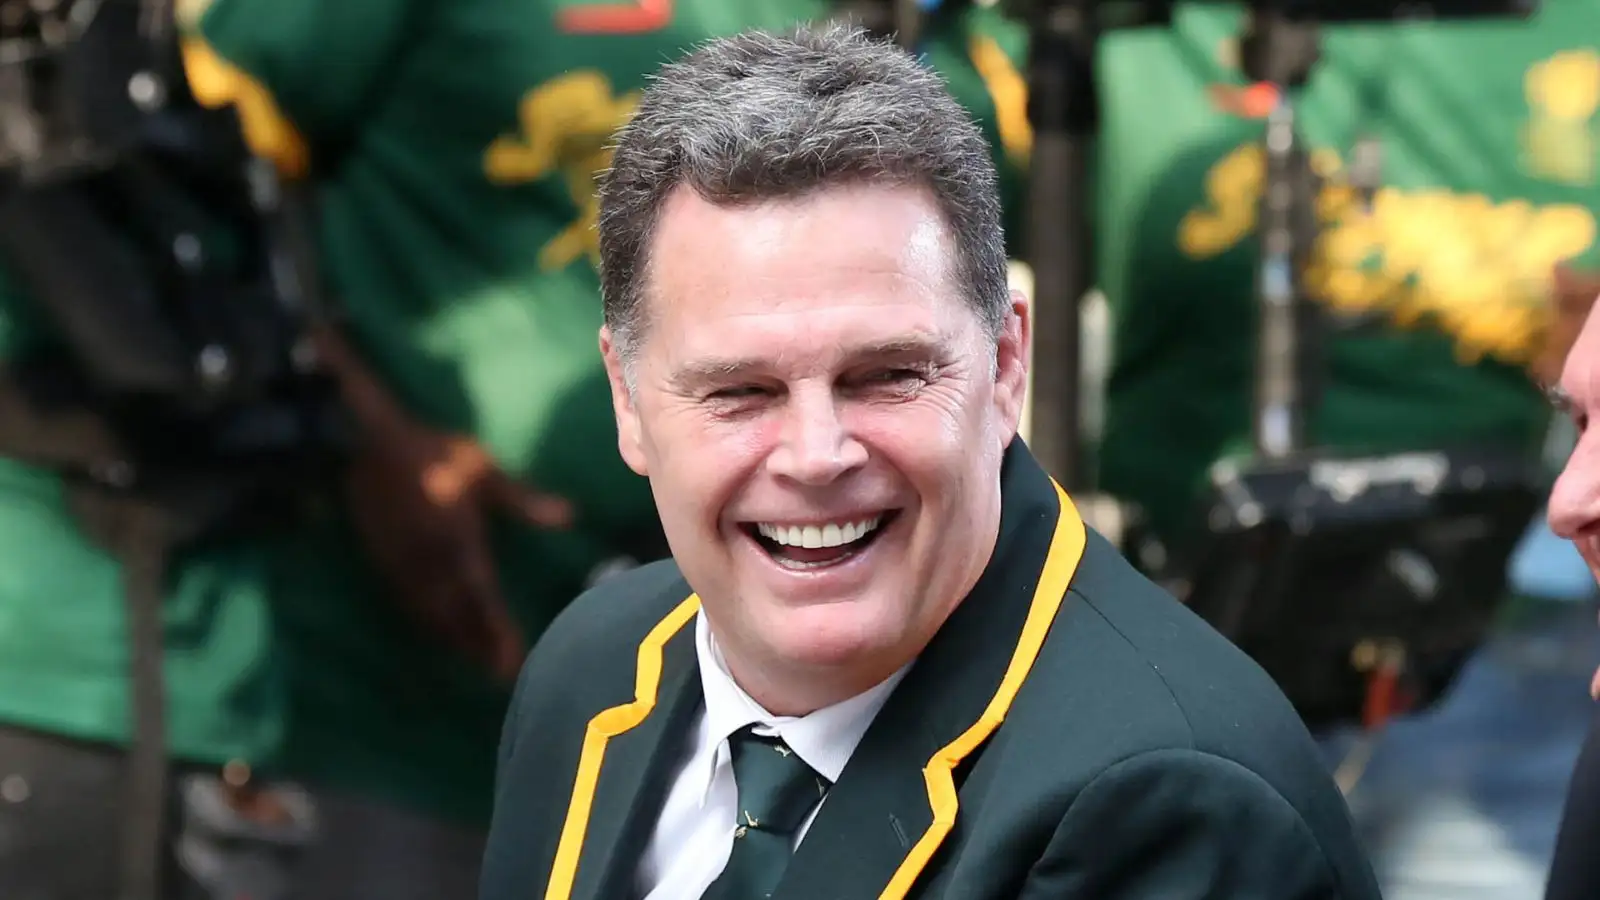 Rassie Erasmus, Director of SARU during the Springboks Rugby World Cup Squad Announcement